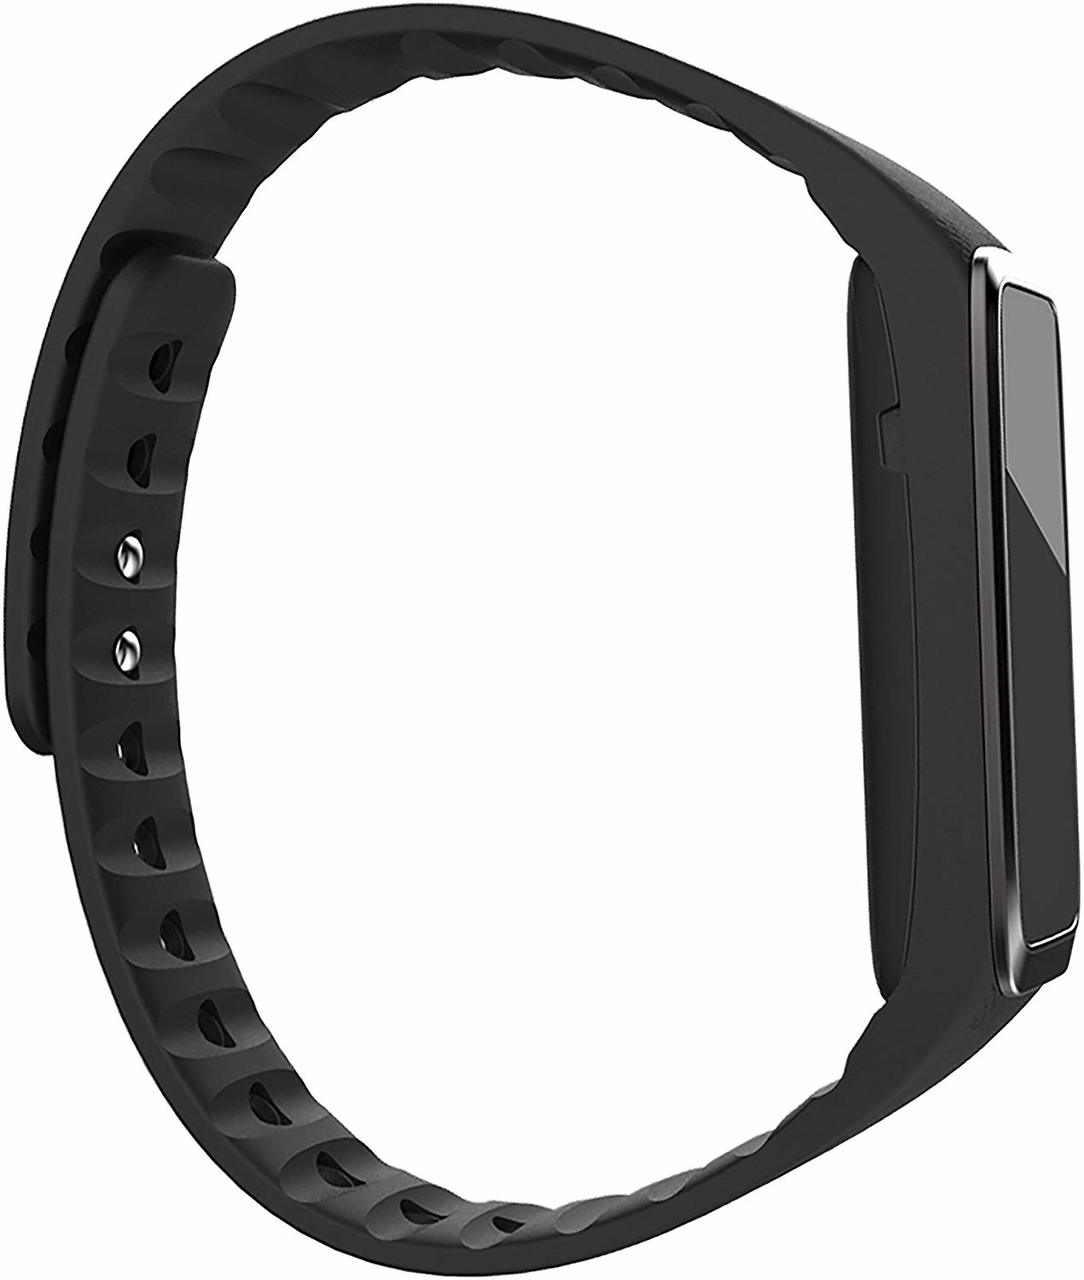 Striiv Fusion Activity Tracker Fitness and Sleep Tracking Smartwatch, 3 Color Bands Included (Black, Red, Blue)